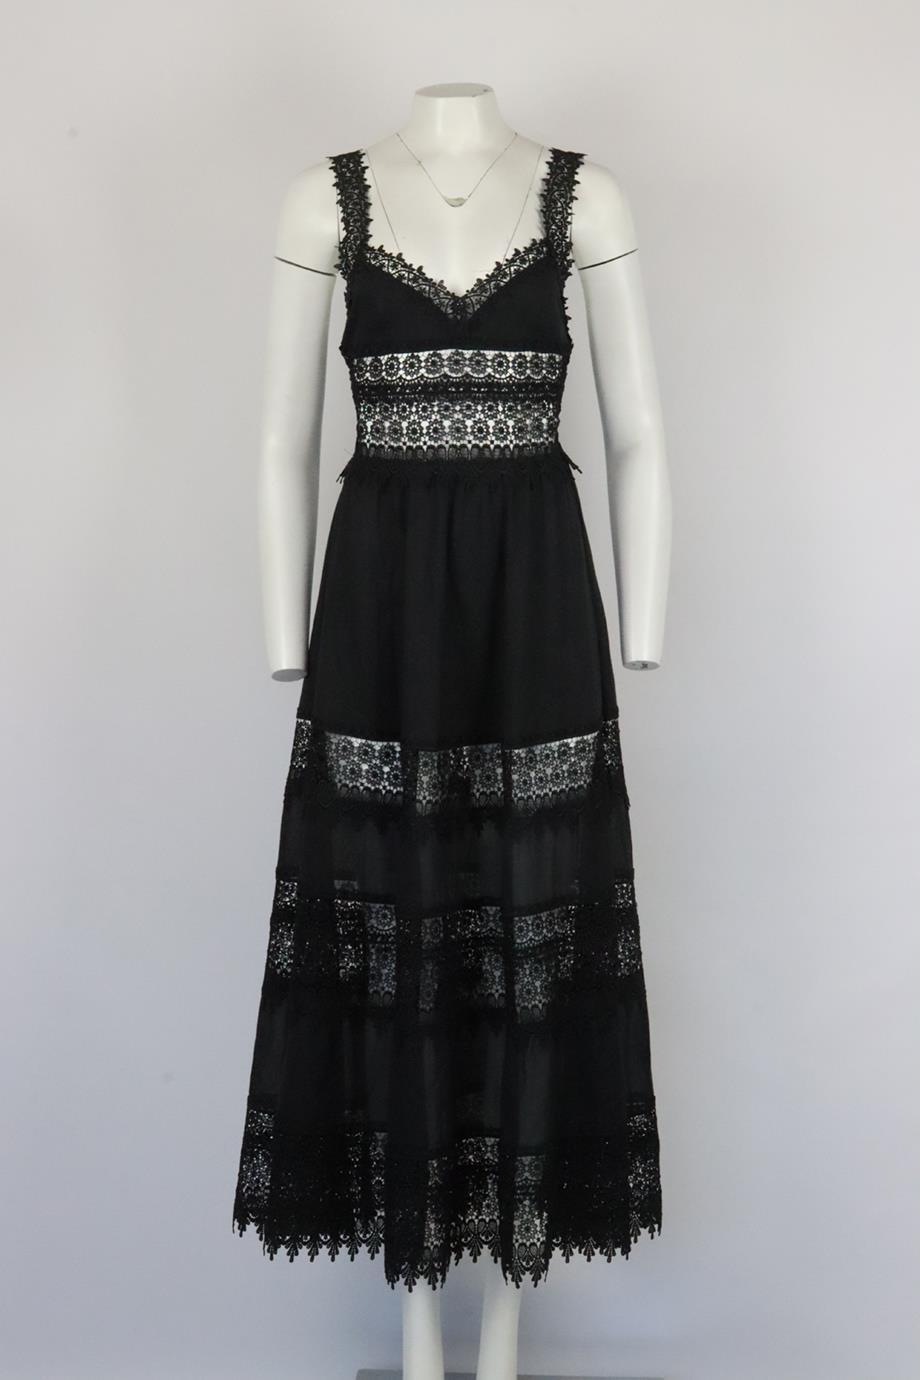 Charo Ruiz lace trimmed cotton blend maxi dress. Black. Sleeveless, v-neck. Slips on. 90% Cotton, 10% polyester. Size: Small (UK 8, US 4, FR 36, IT 40). Bust: 26.2 in. Waist: 22.4 in. Hips: 30.2 in. Length: 44 in. Very good condition - As new